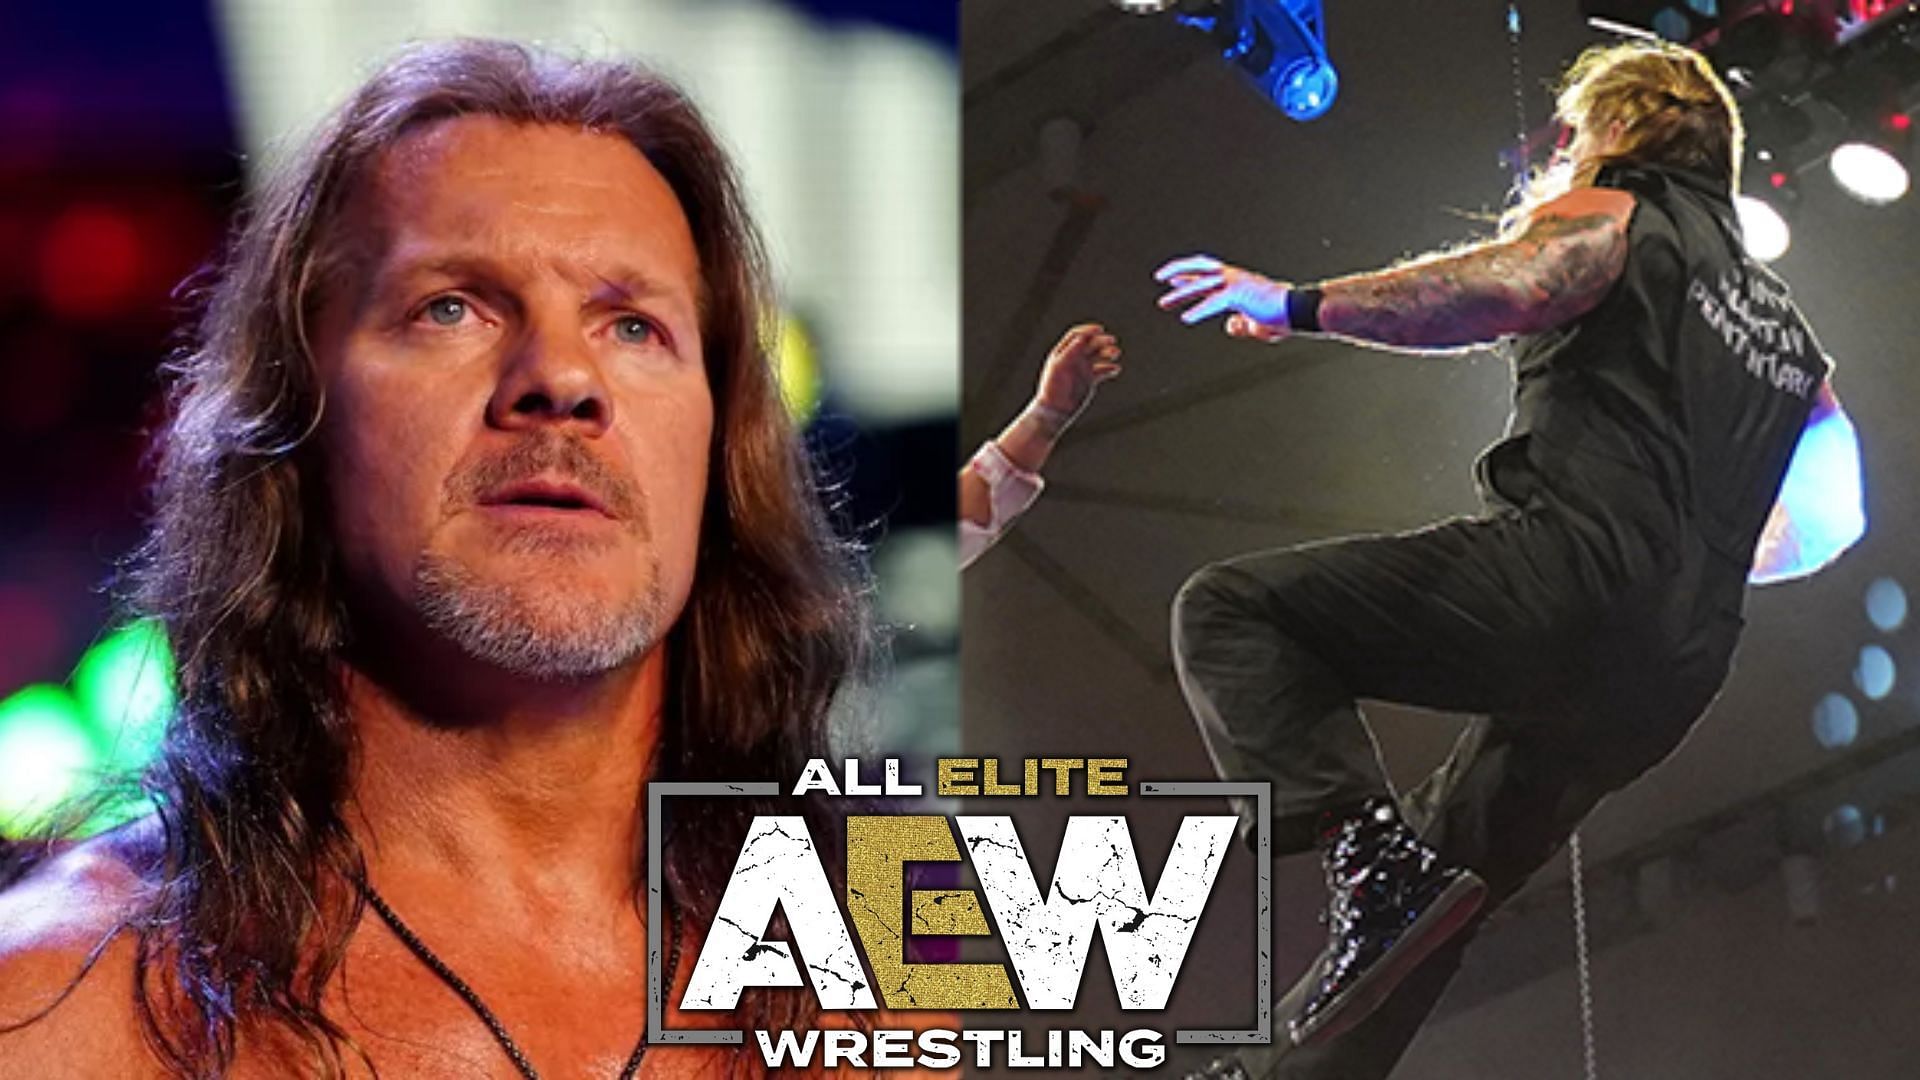 Jericho has taken quite a lot of bumps during his AEW career.